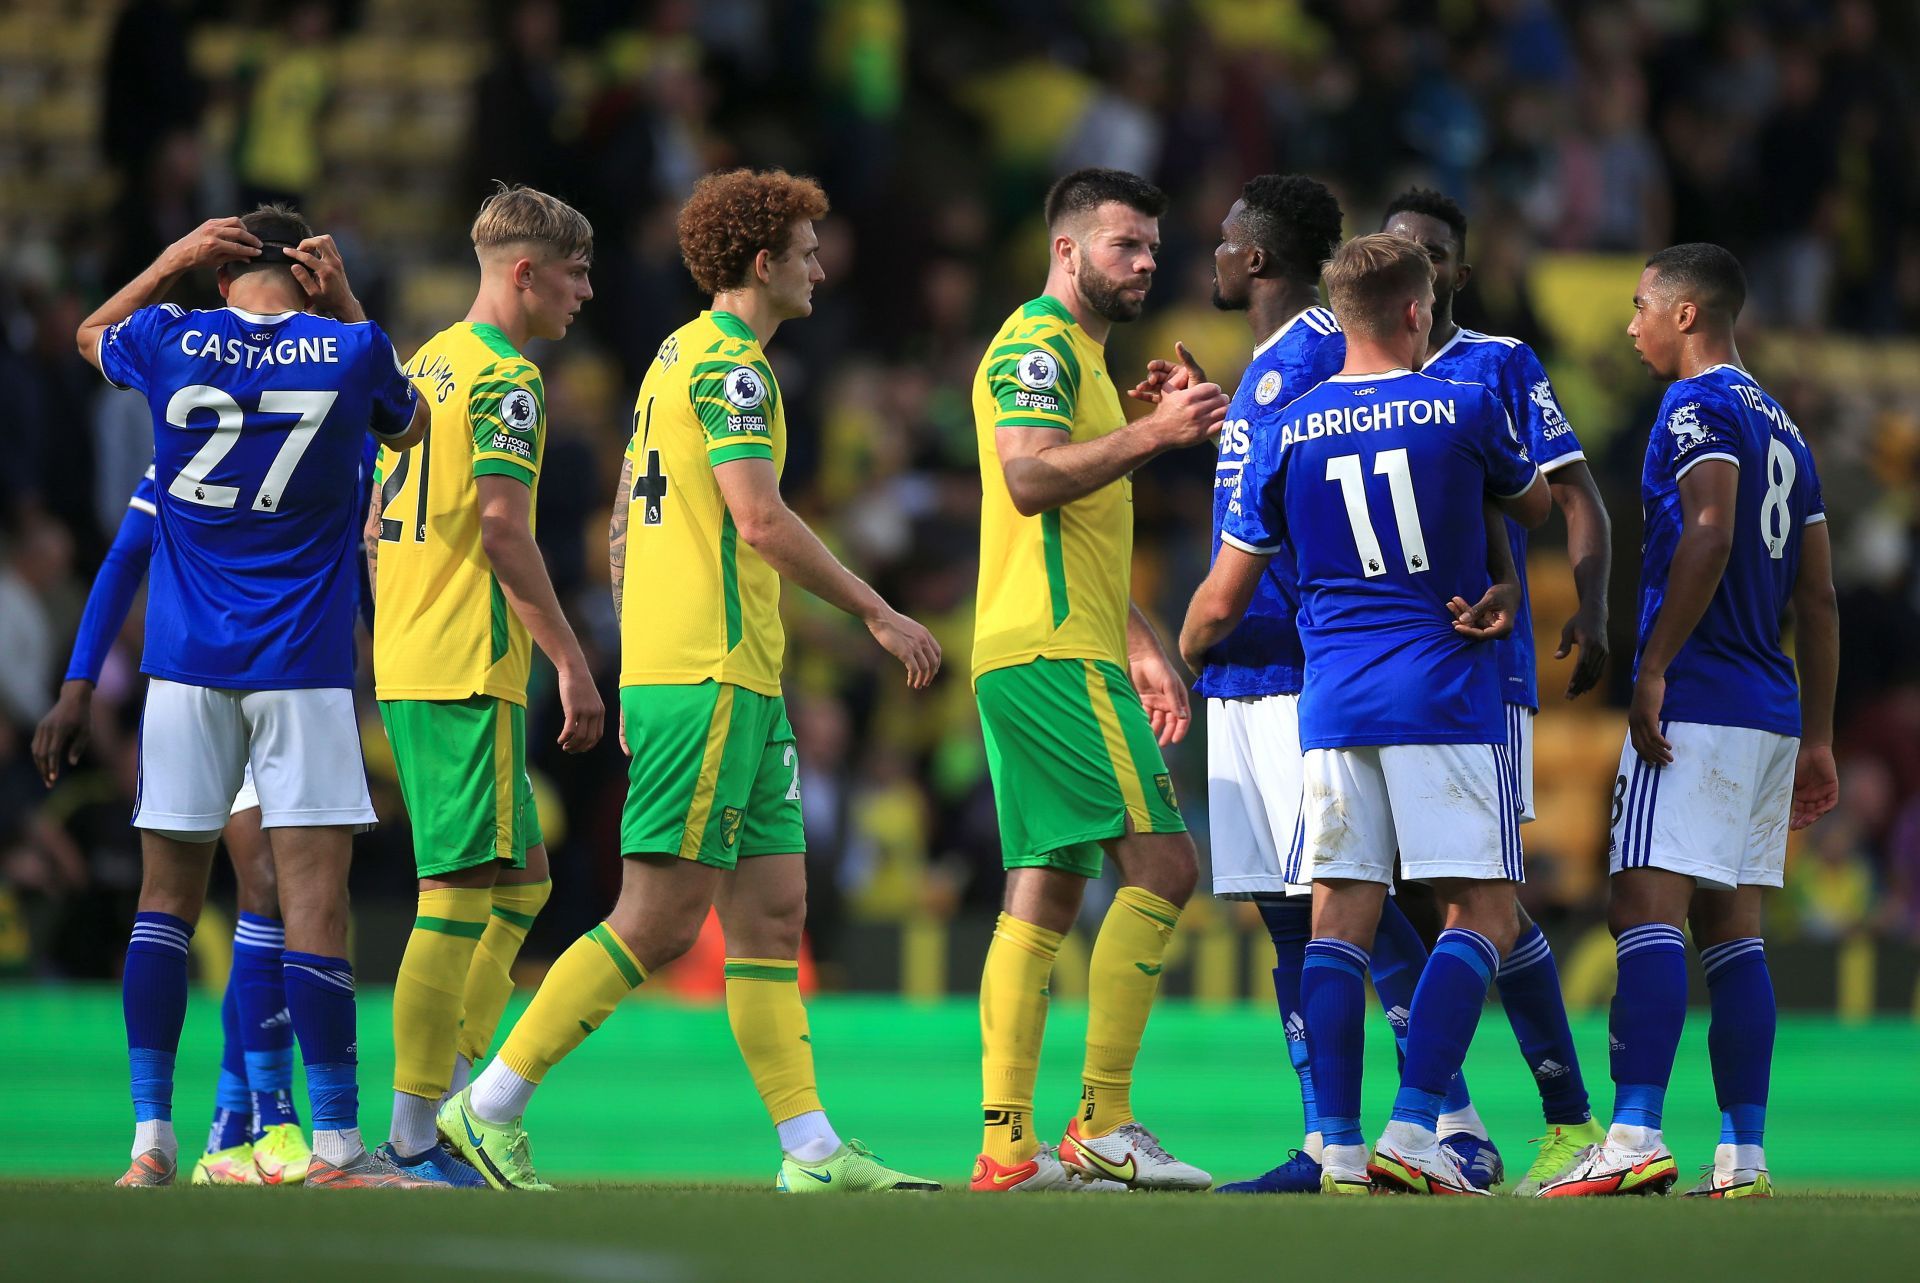 Leicester City will face Norwich City in the Premier League on Wednesday.